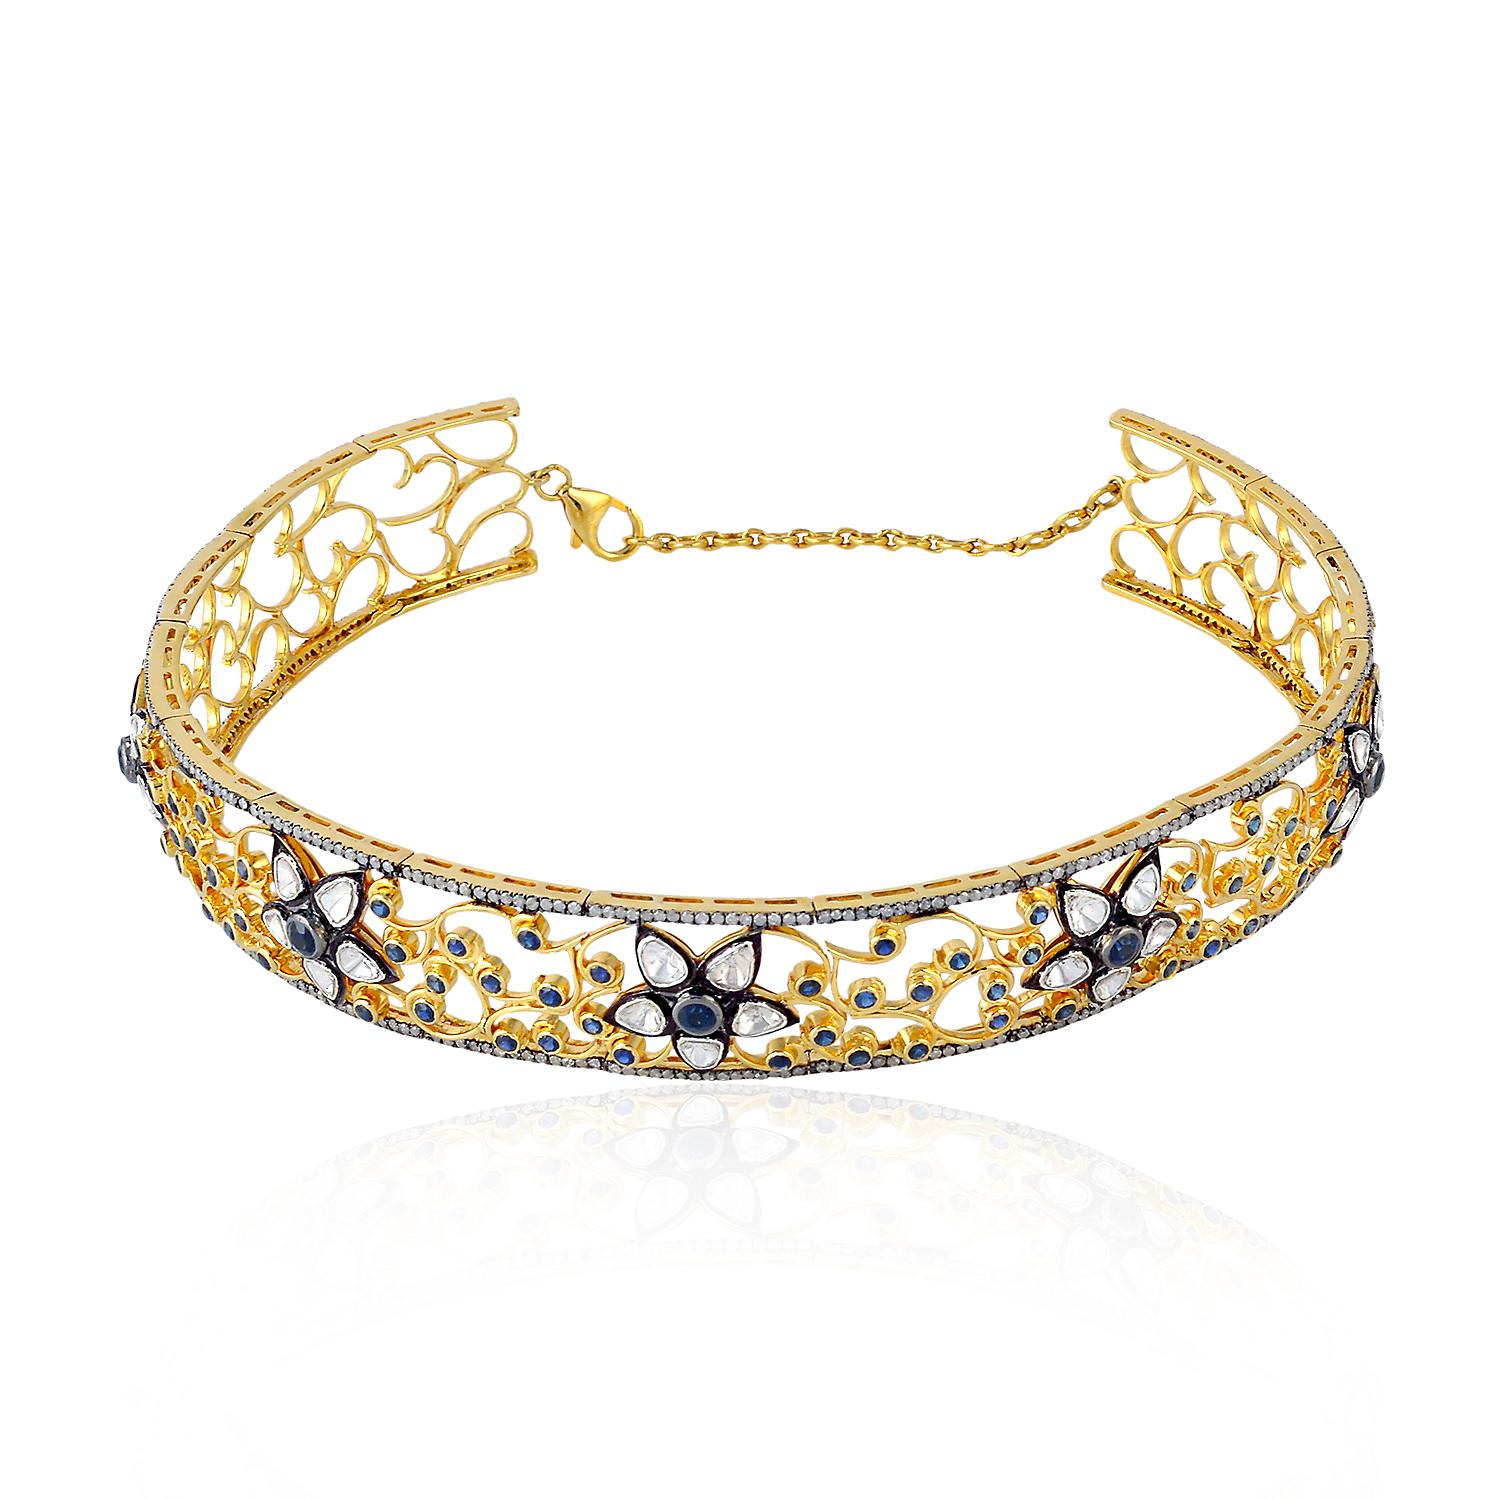 Mixed Cut Filigree Designed Choker Necklace in 18k Gold & Silver with Diamonds & Sapphires For Sale